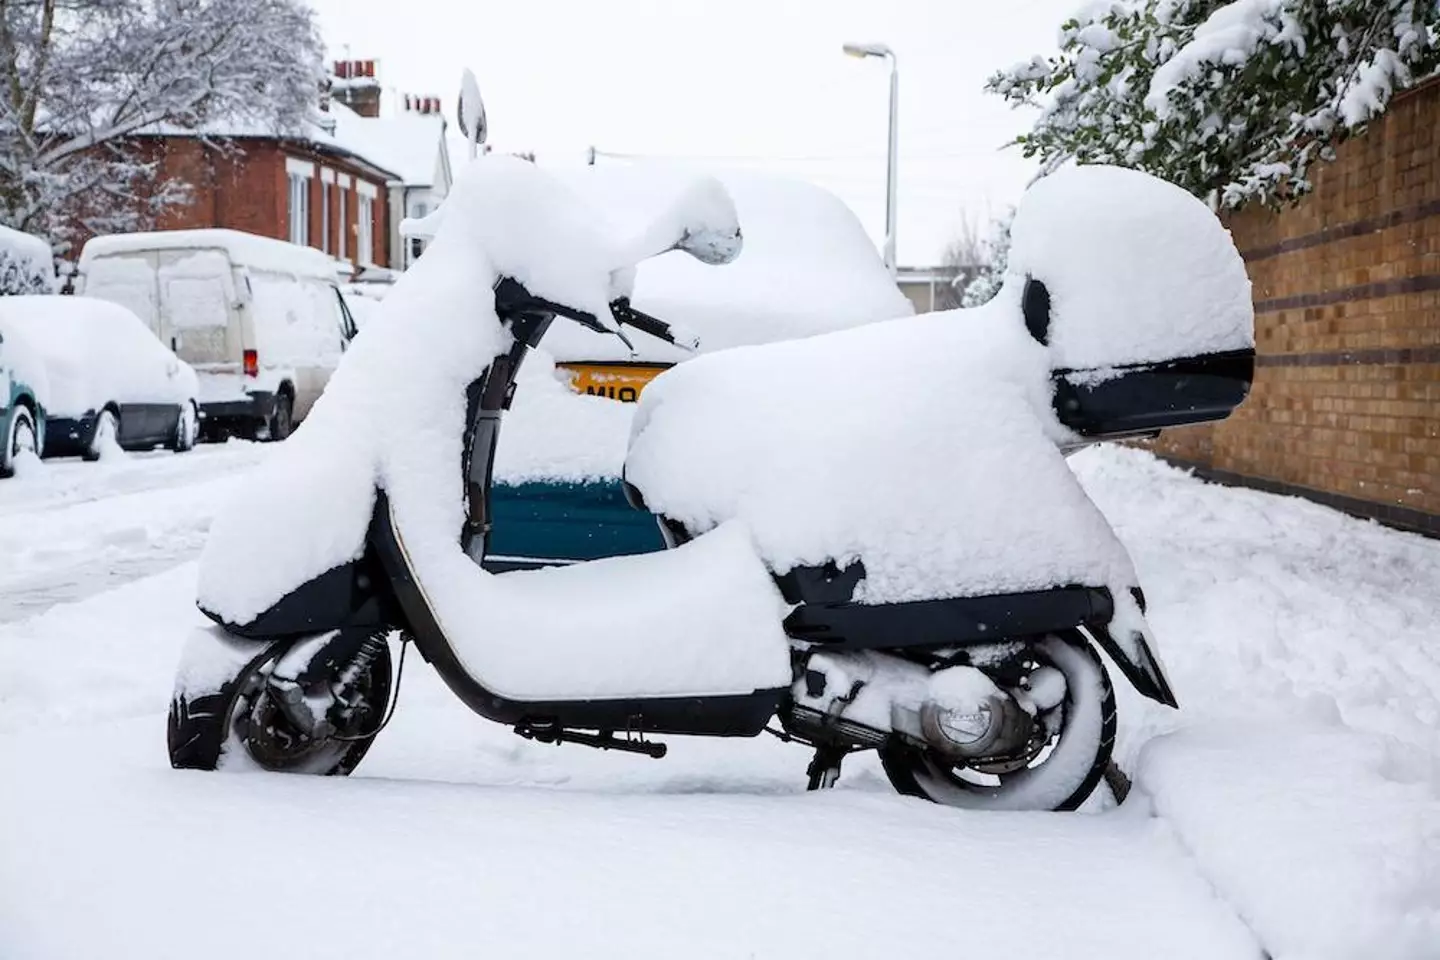 The UK was blanketed in snow back in 2009.